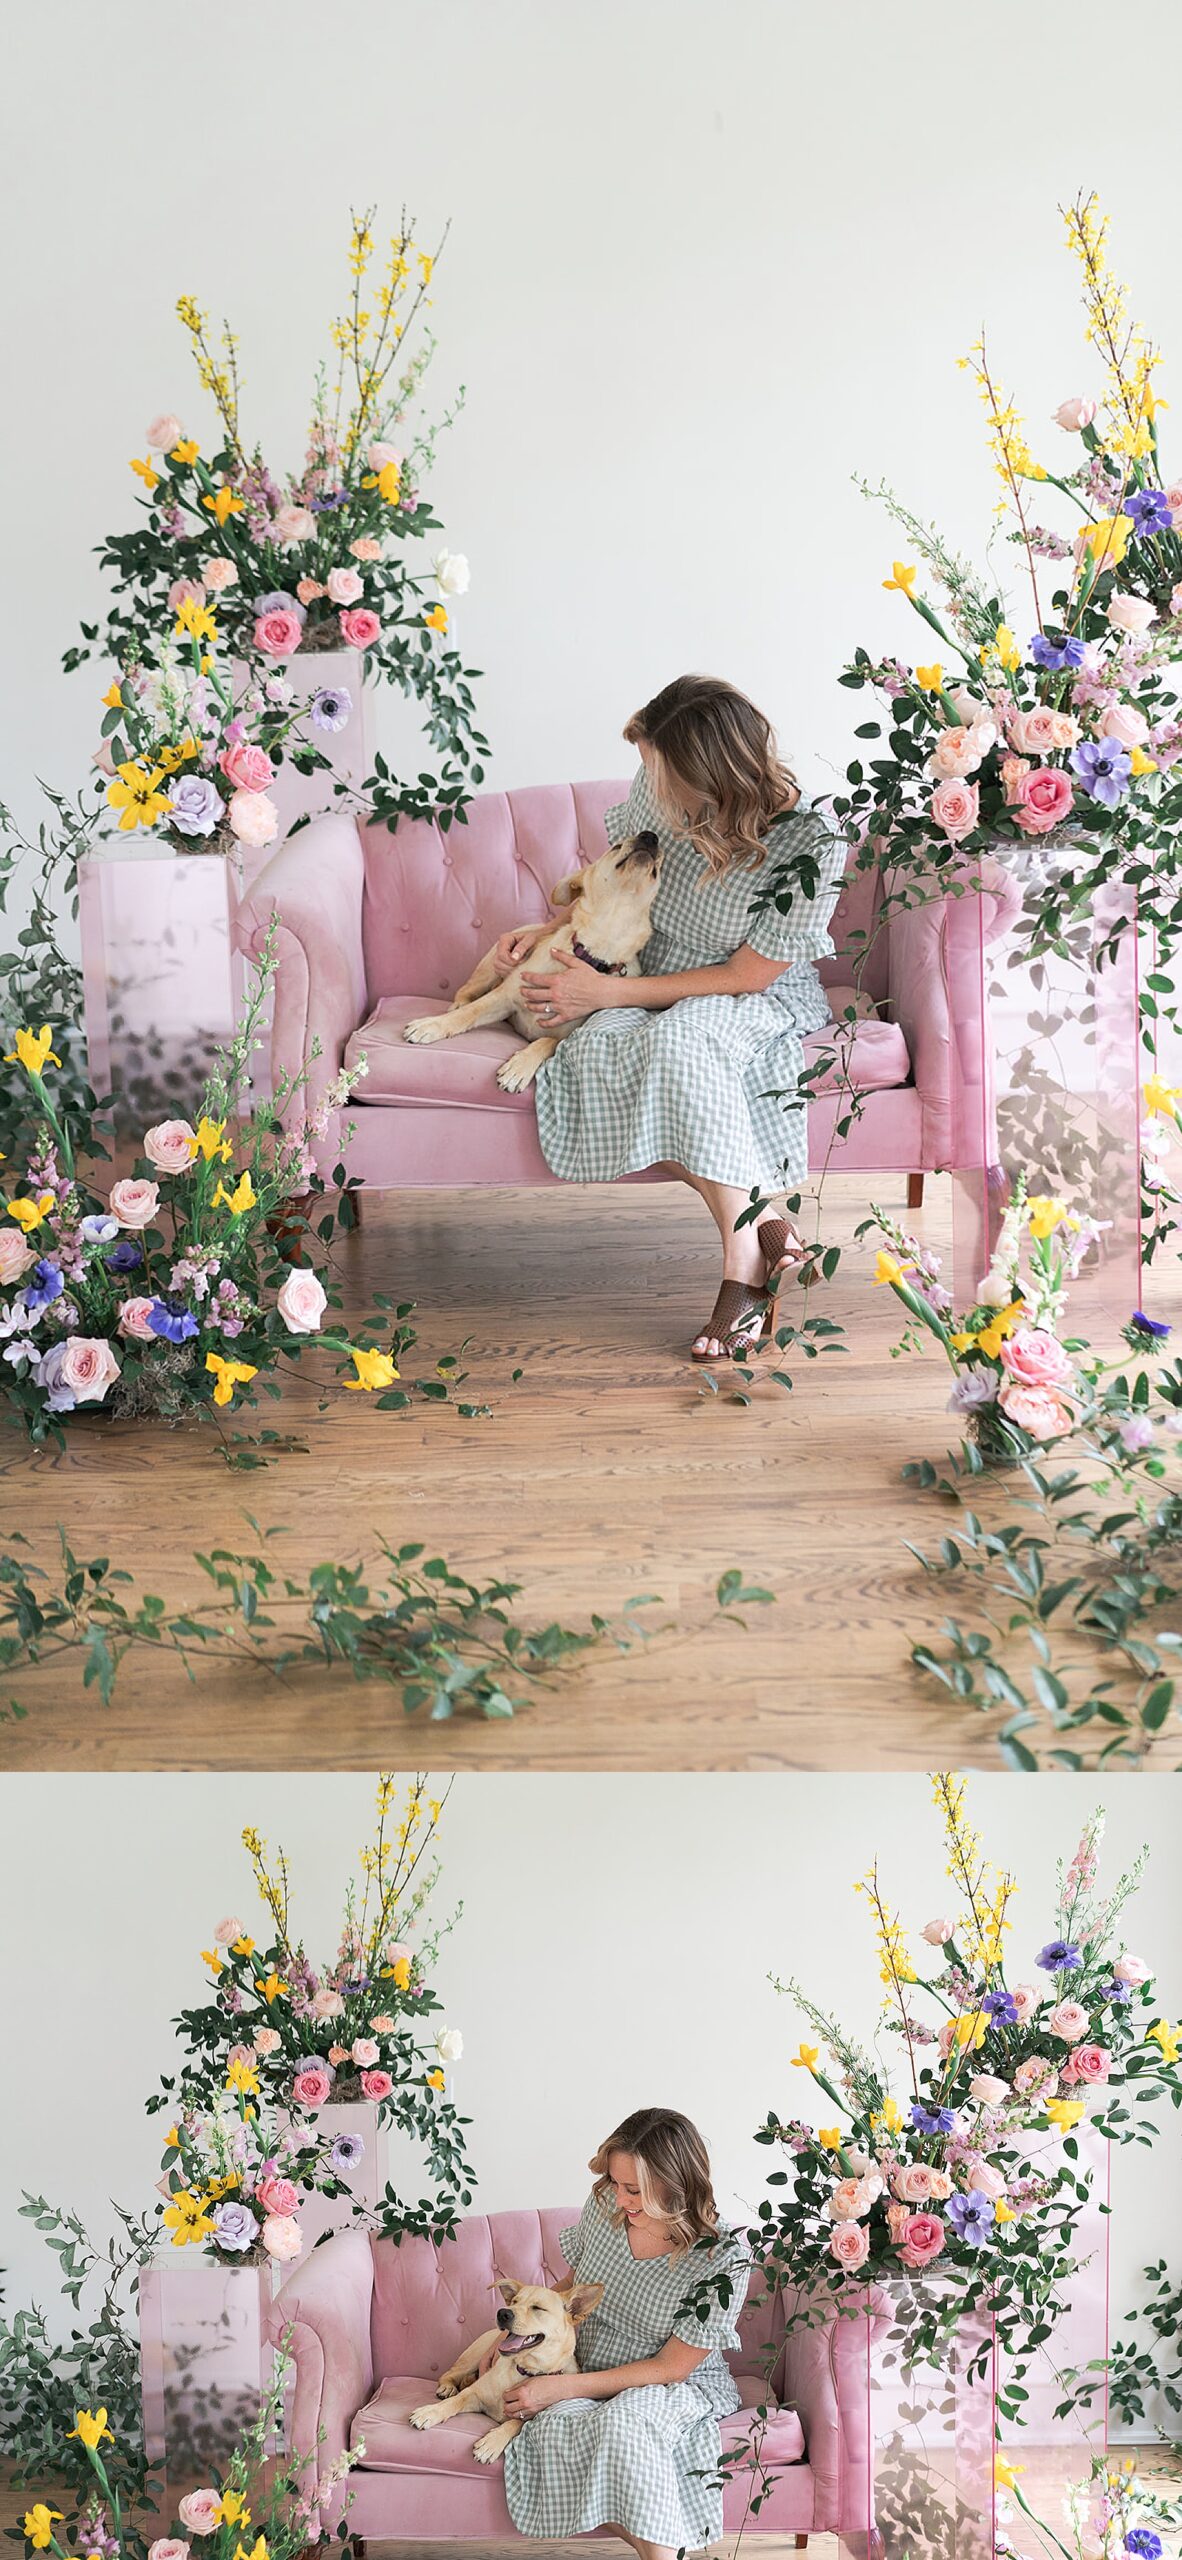 Spring inspired floral installations perfectly compliment pink couch the woman and her dog are sitting on by Swish & Click Photography